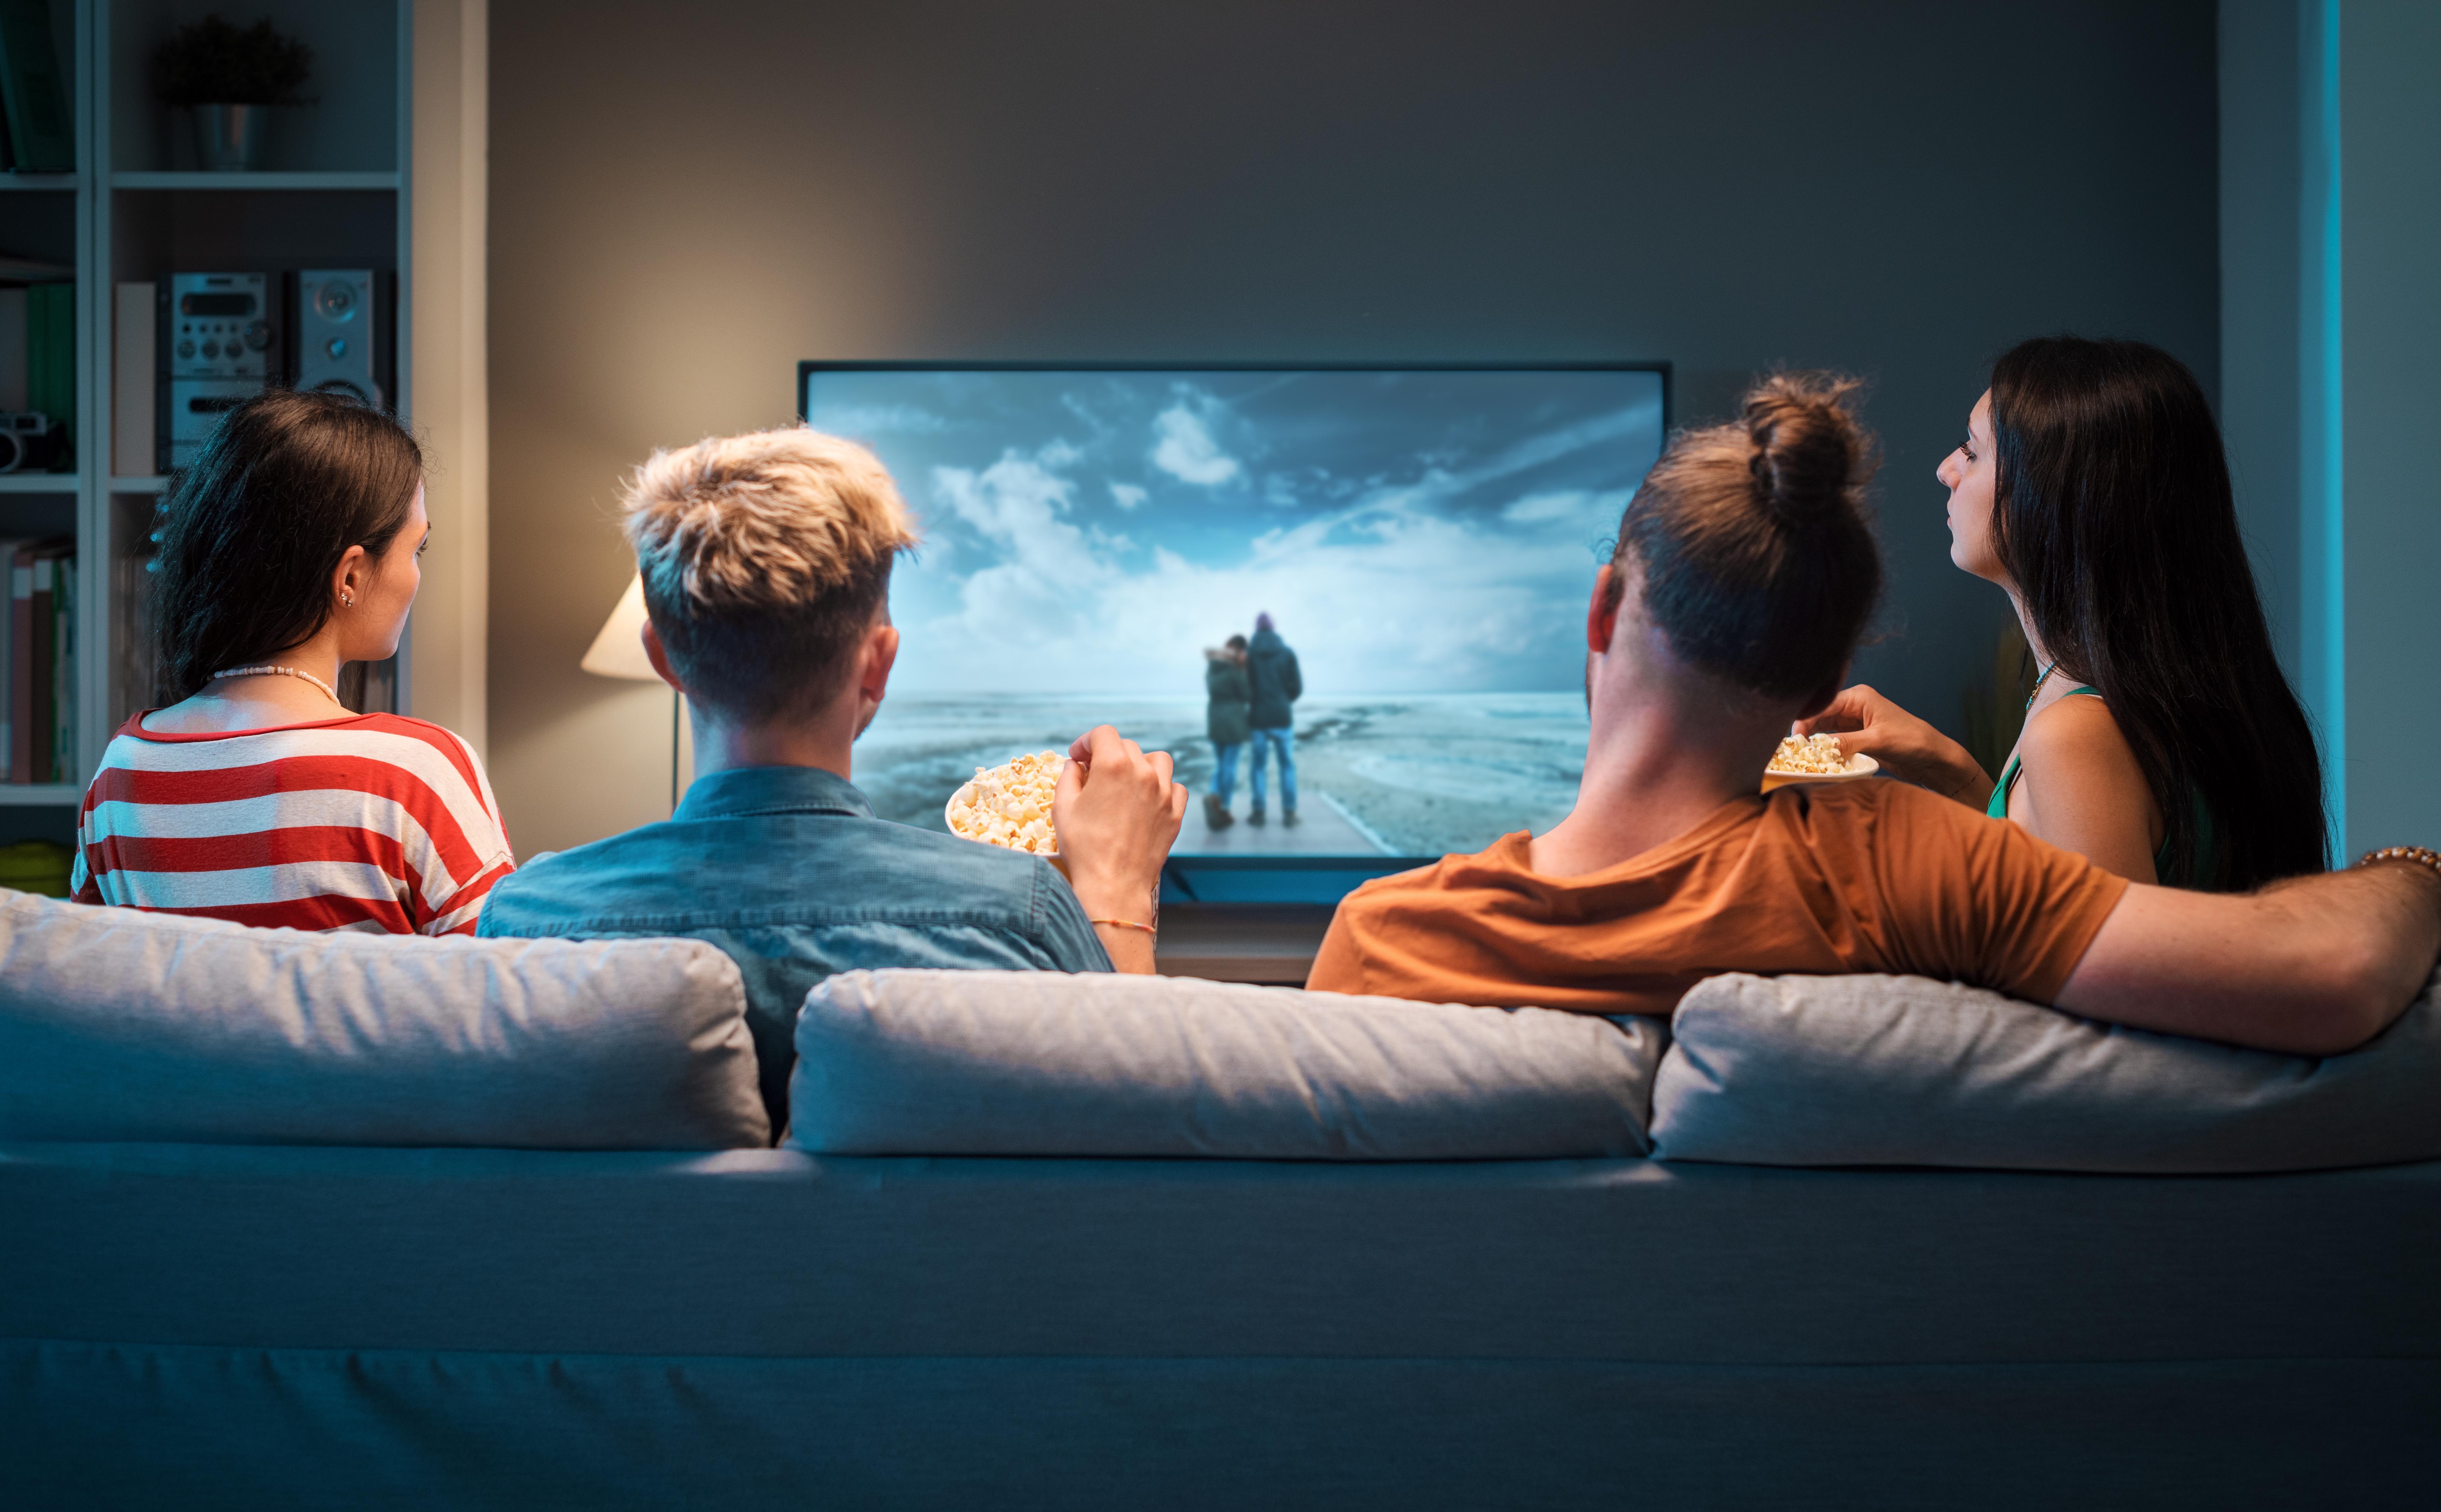 OLED vs QLED: which is the best TV display technology?